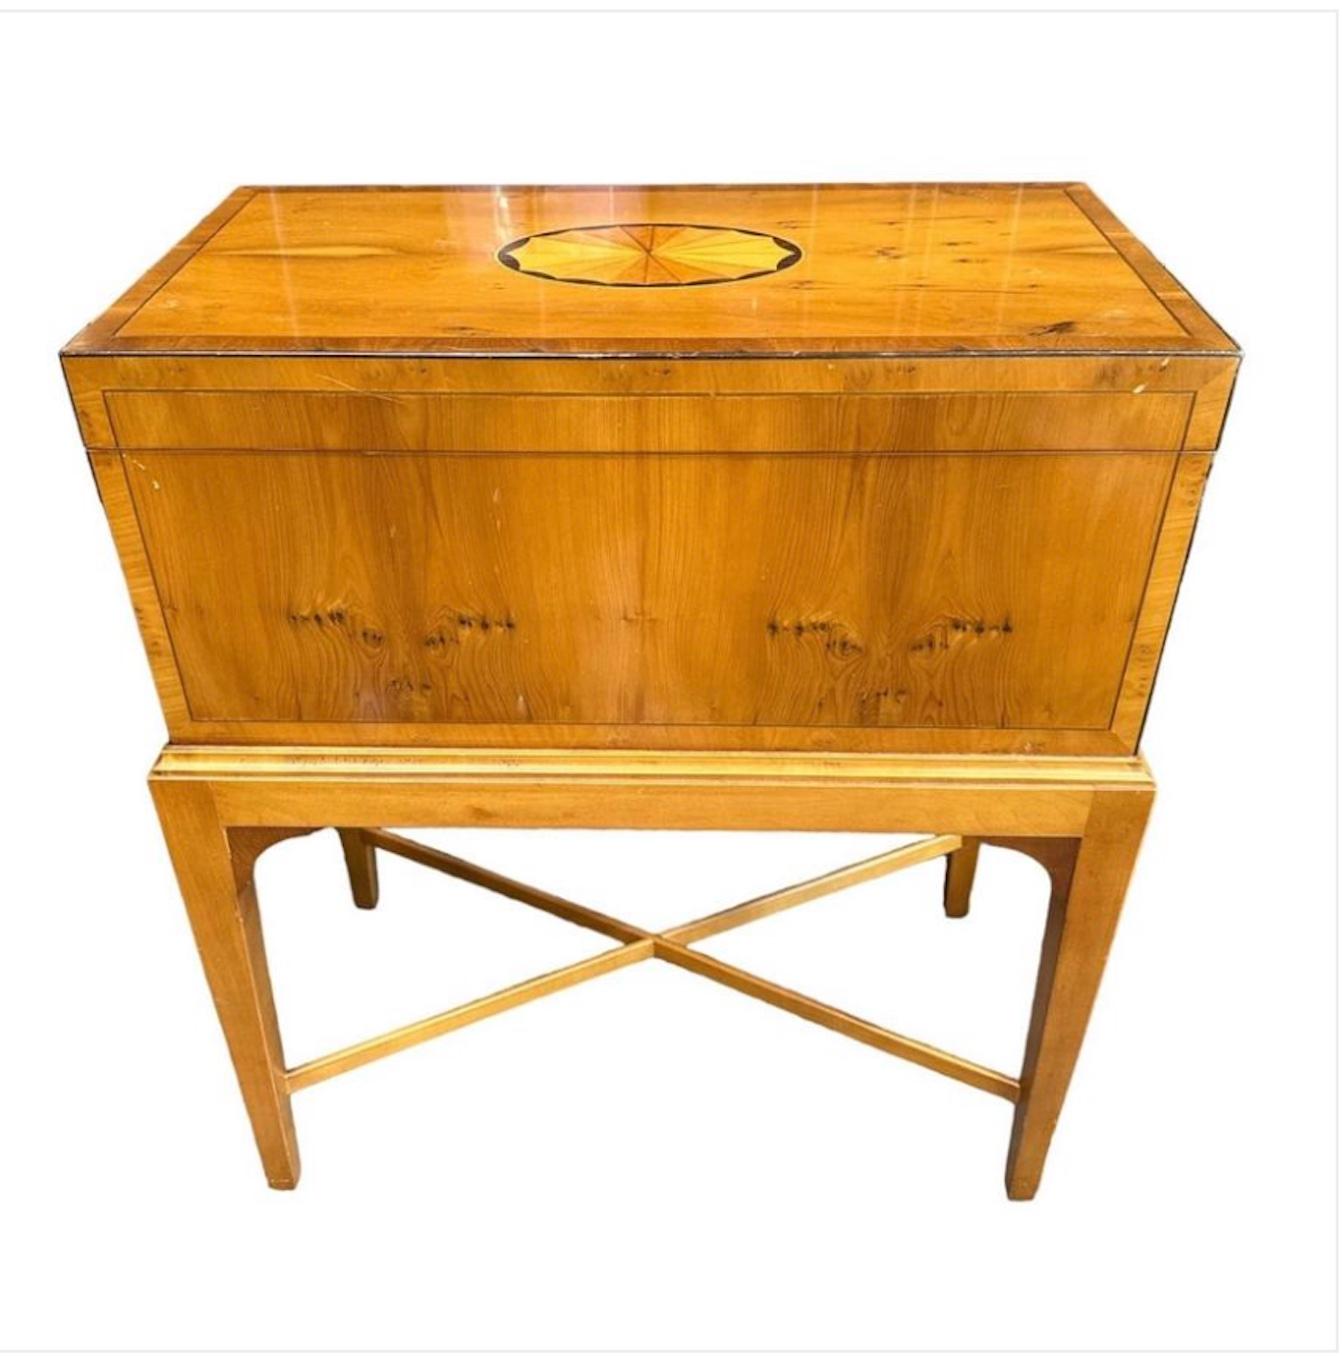 George III Baker Furniture Side Table Or Humidor. Satinwood With Inlay. For Sale